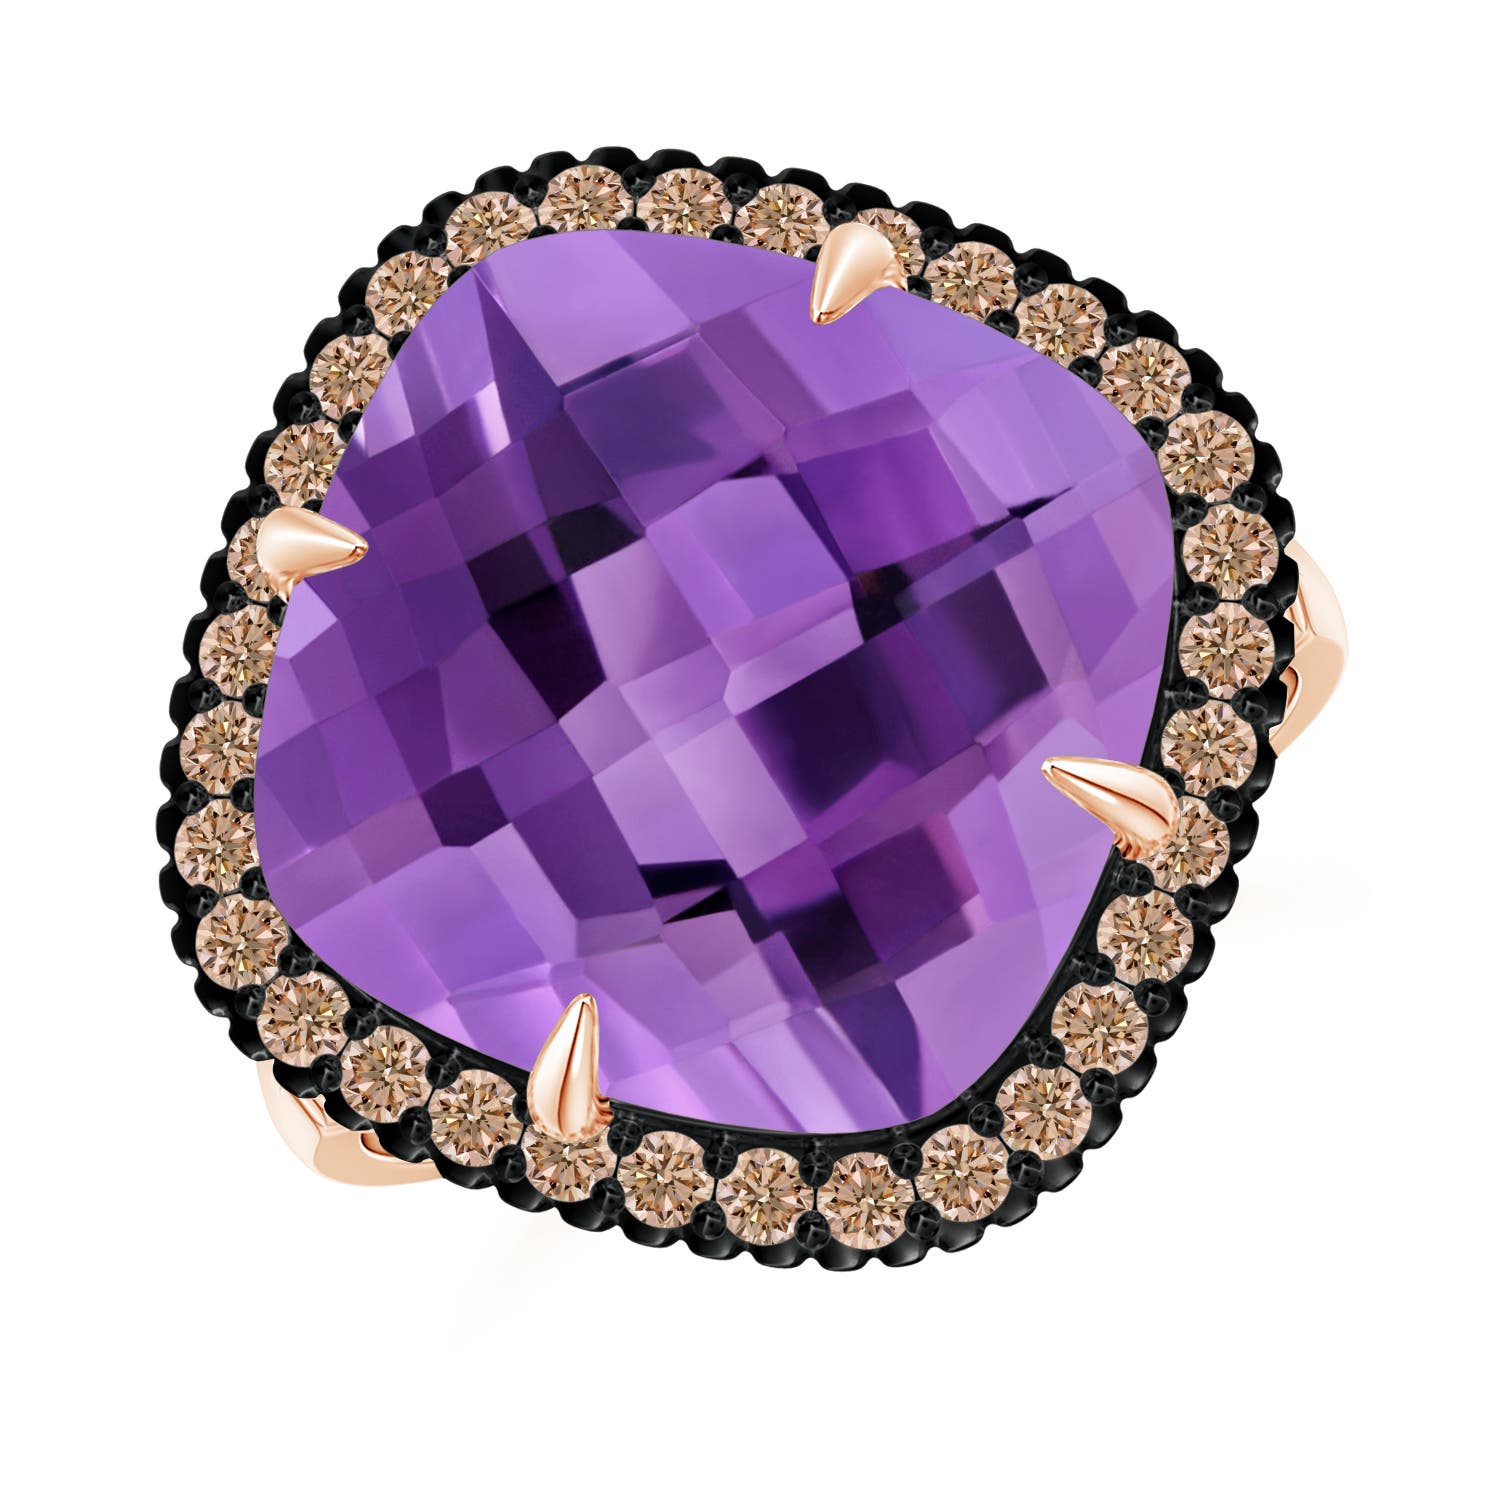 AA - Amethyst / 8.38 CT / 14 KT Rose Gold